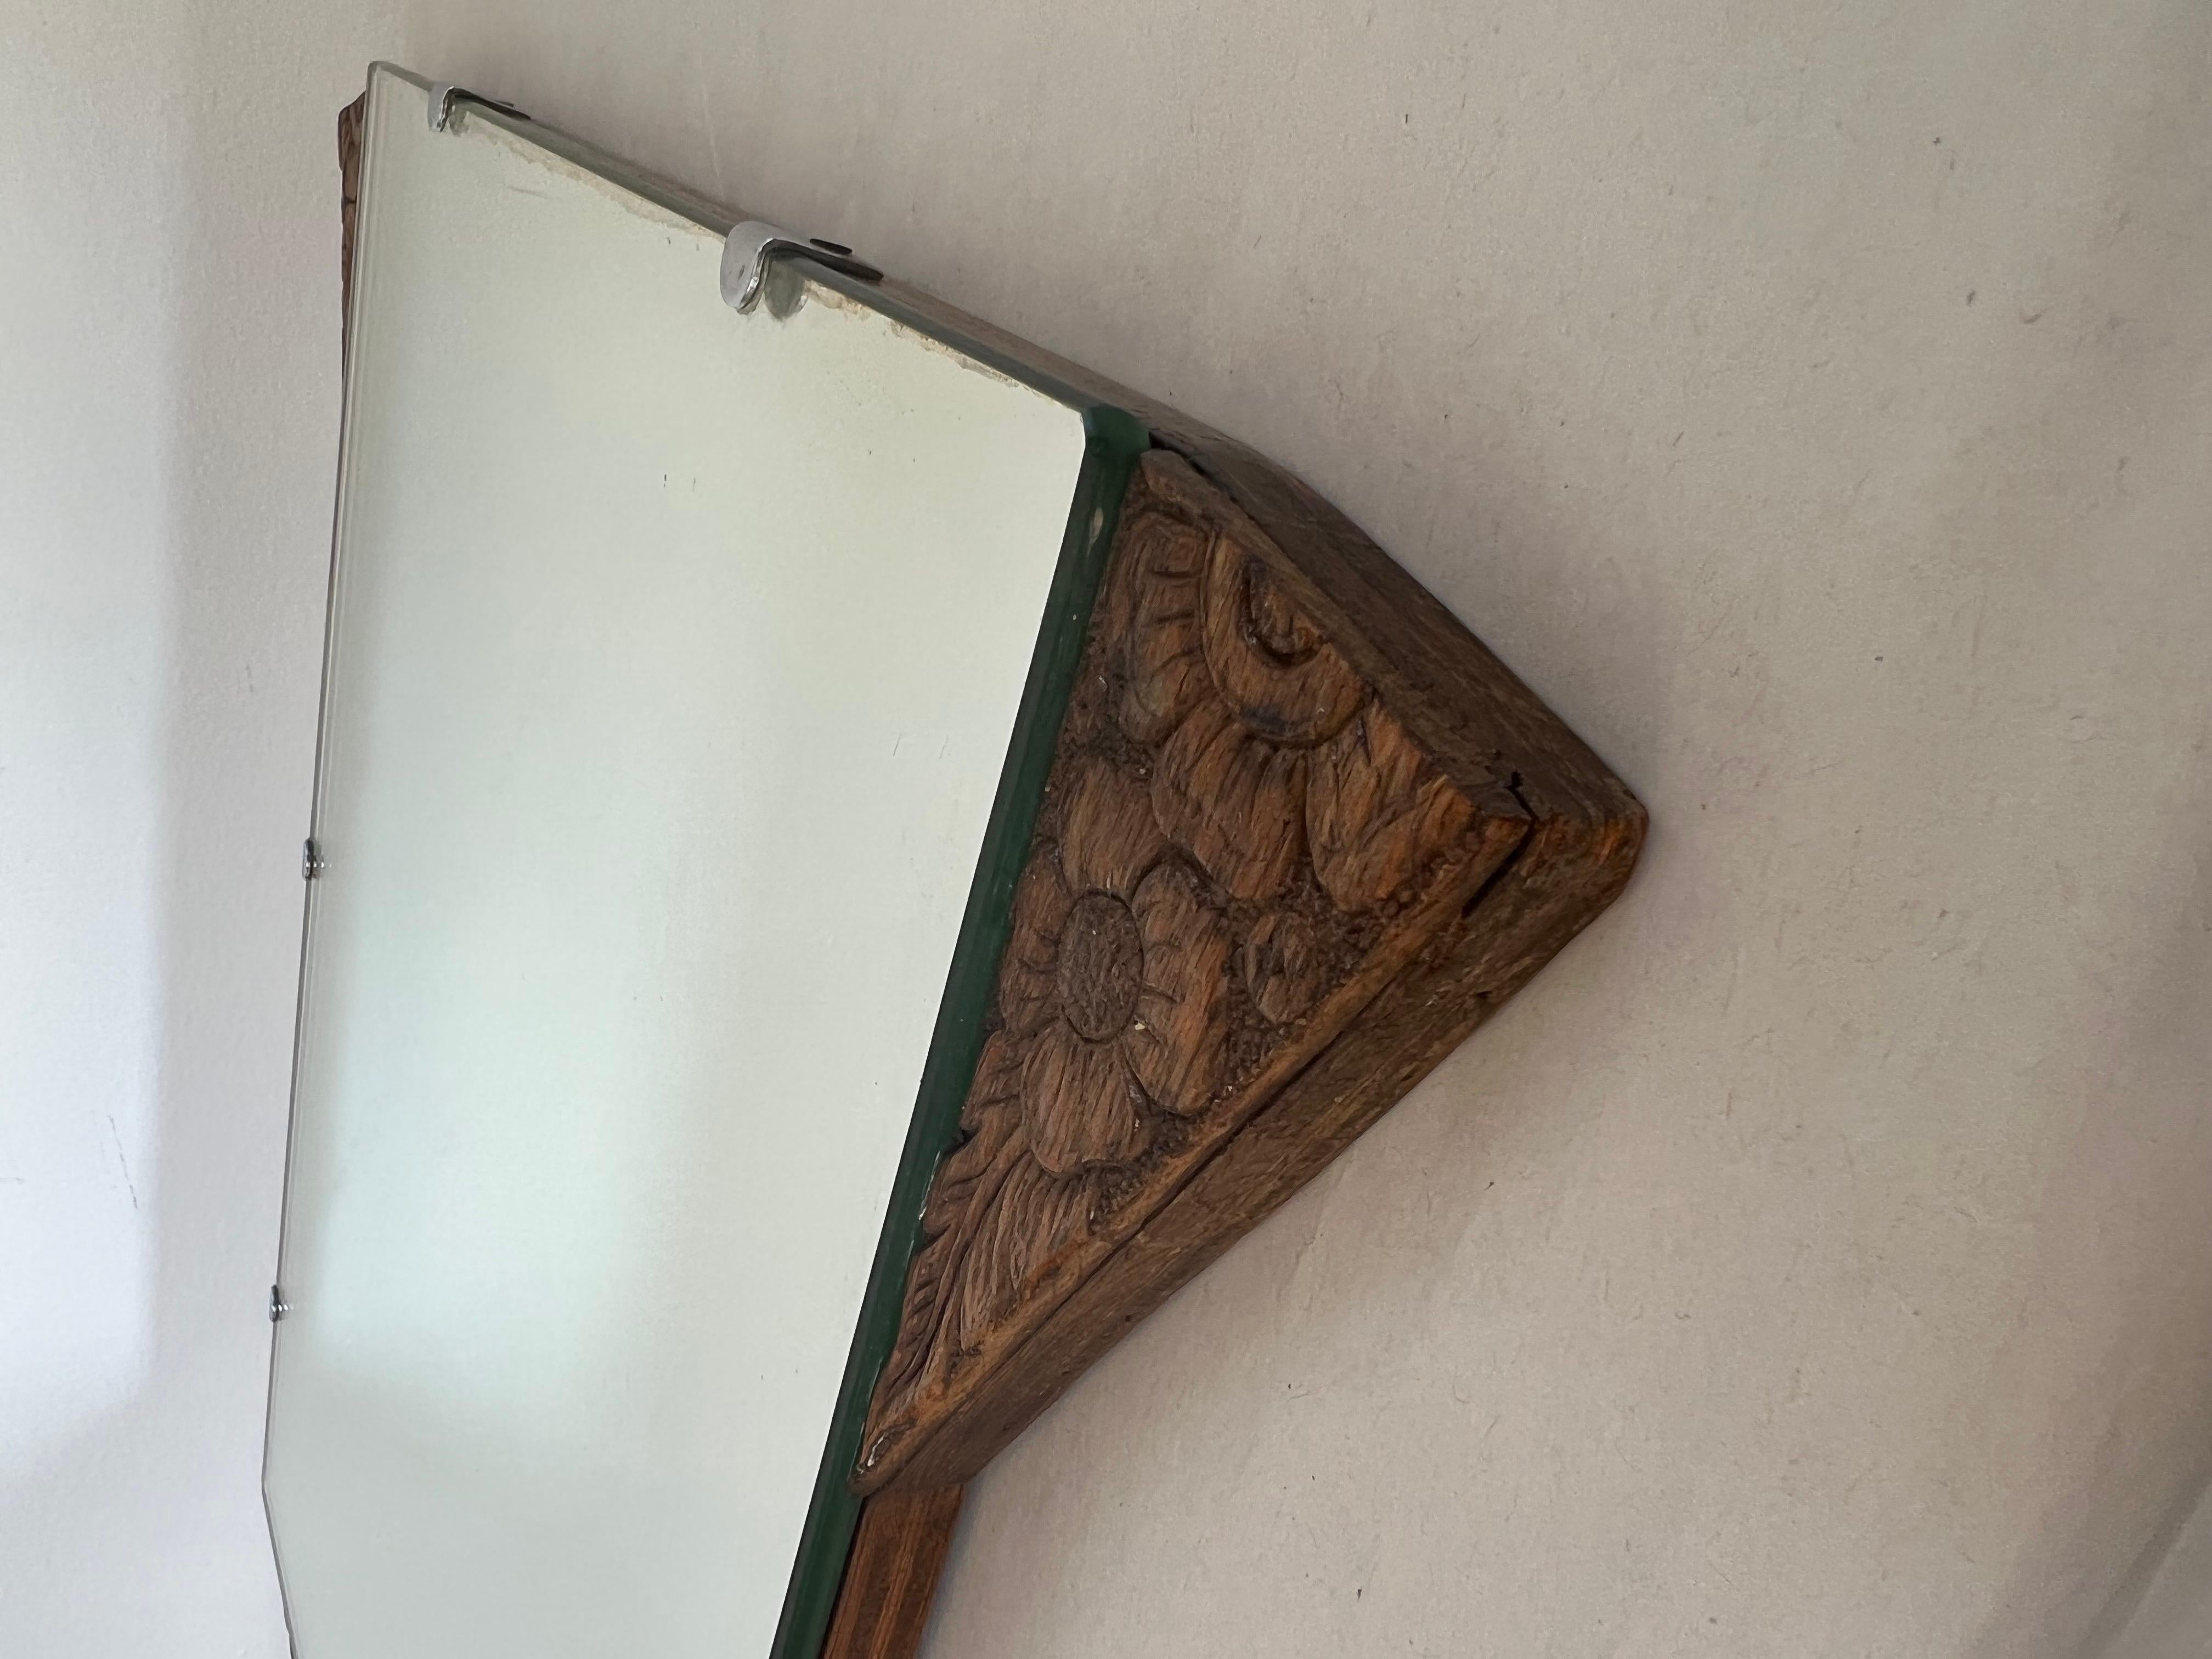 Mid-20th Century Vintage Mirror Art Deco Style with Floral Carvings Possible Circa 1950s-1970s For Sale